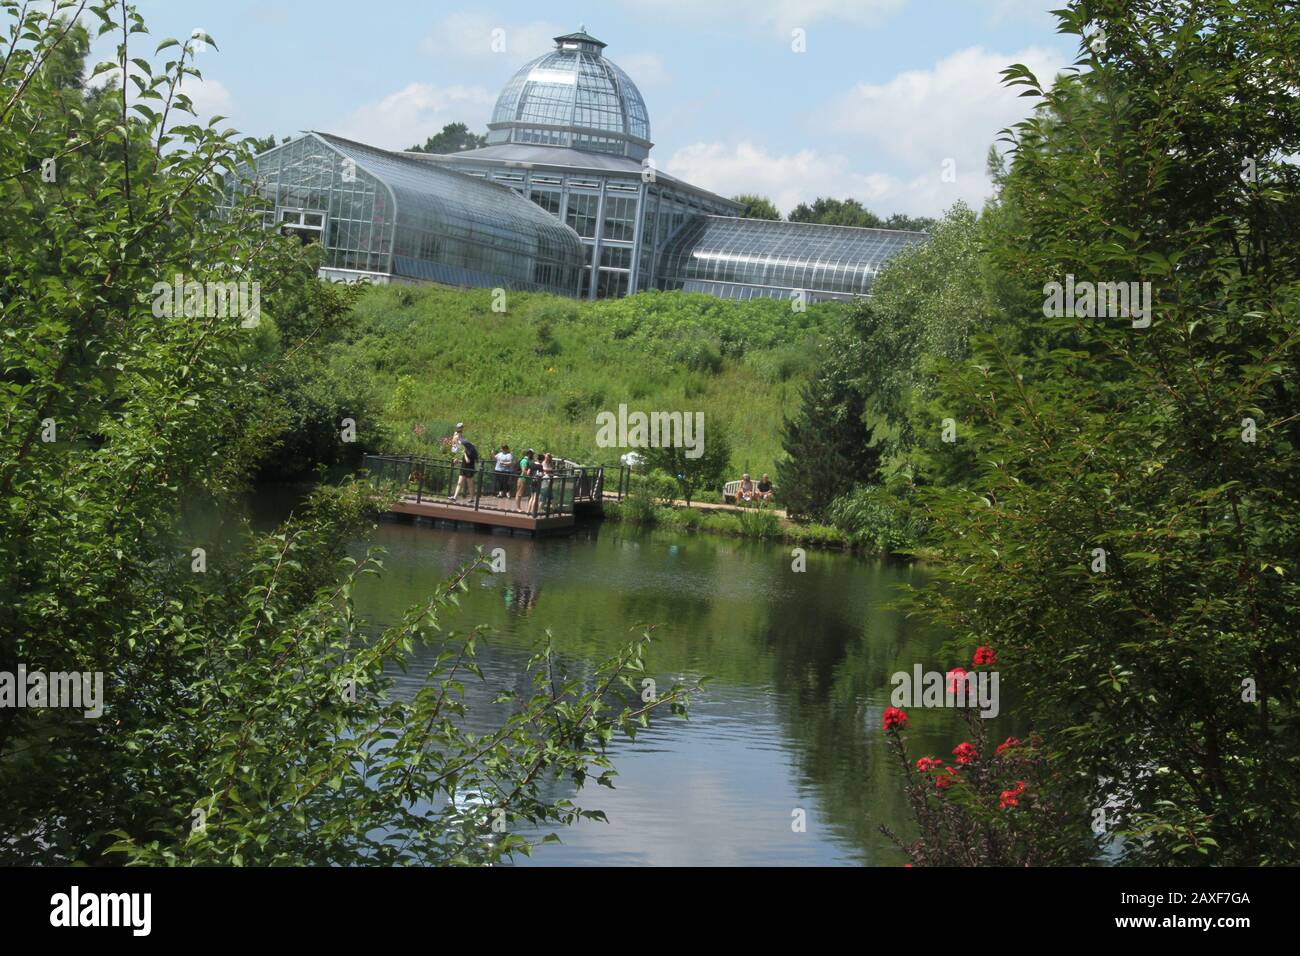 The Conservatory at the Lewis Ginter Botanical Garden in Richmond, VA, USA Stock Photo